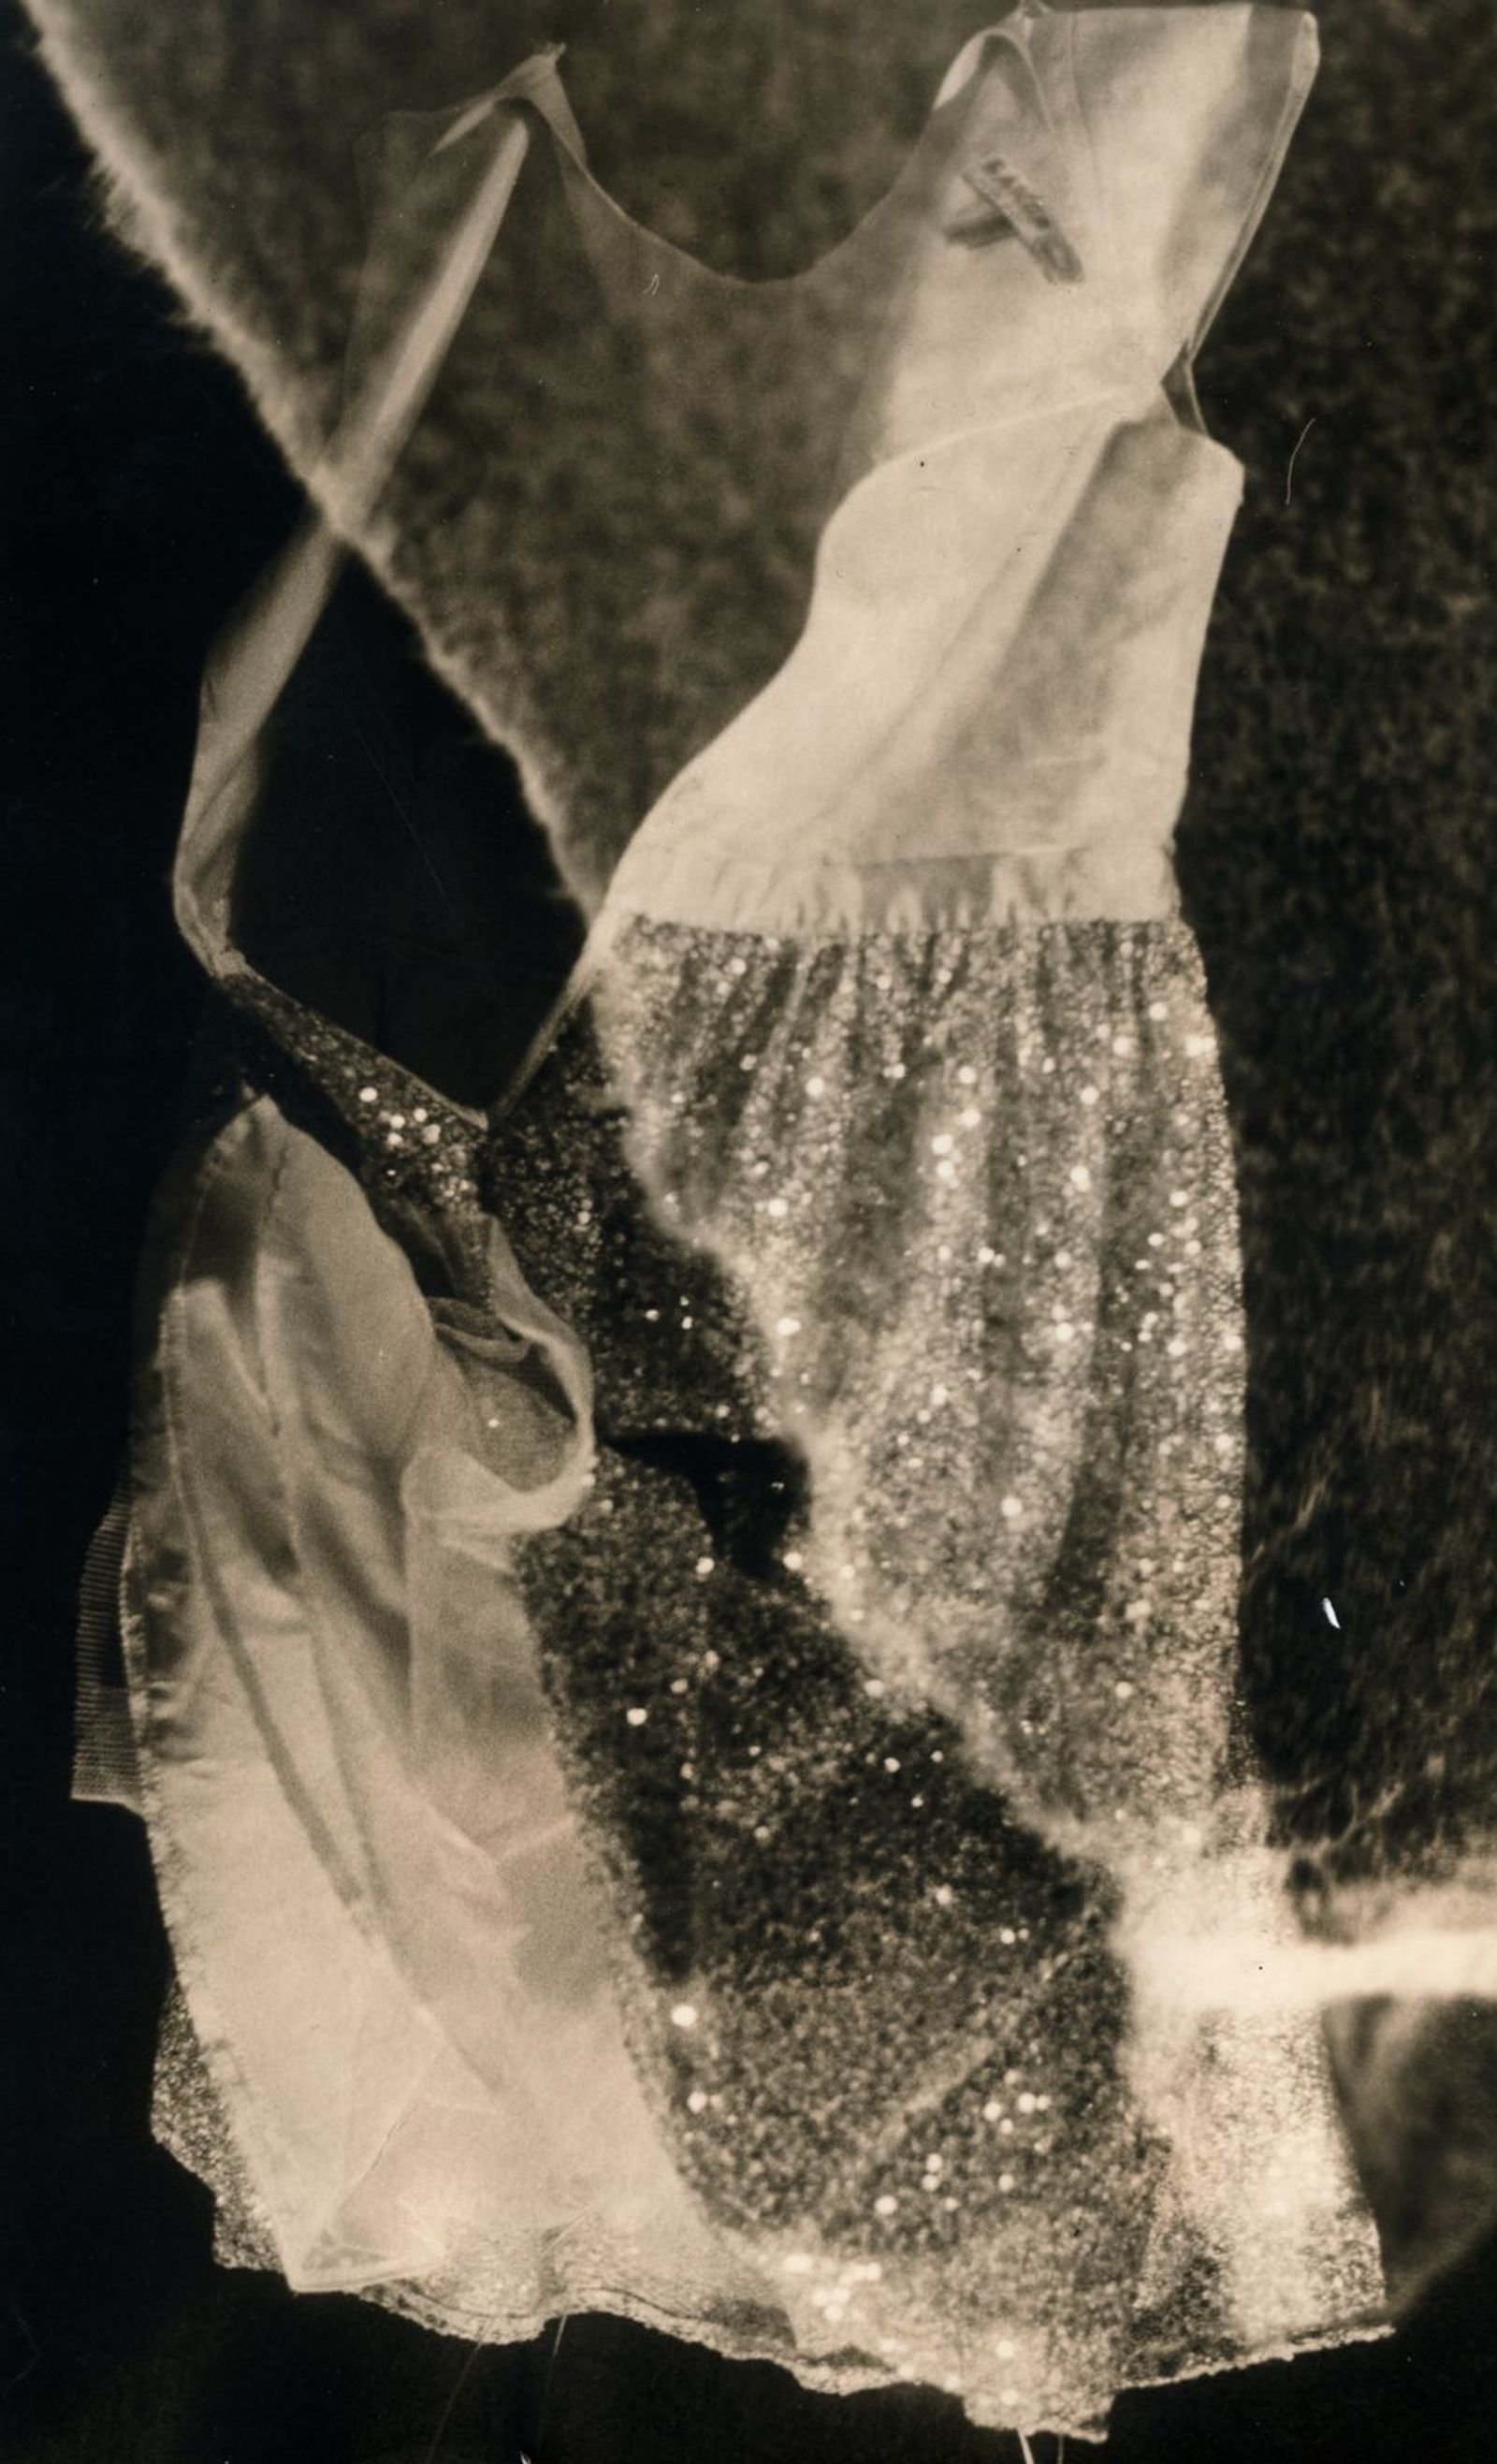 © Jo Stapleton - Child's party dress with tissue paper. Lith print (image exposed through torn tissue paper)